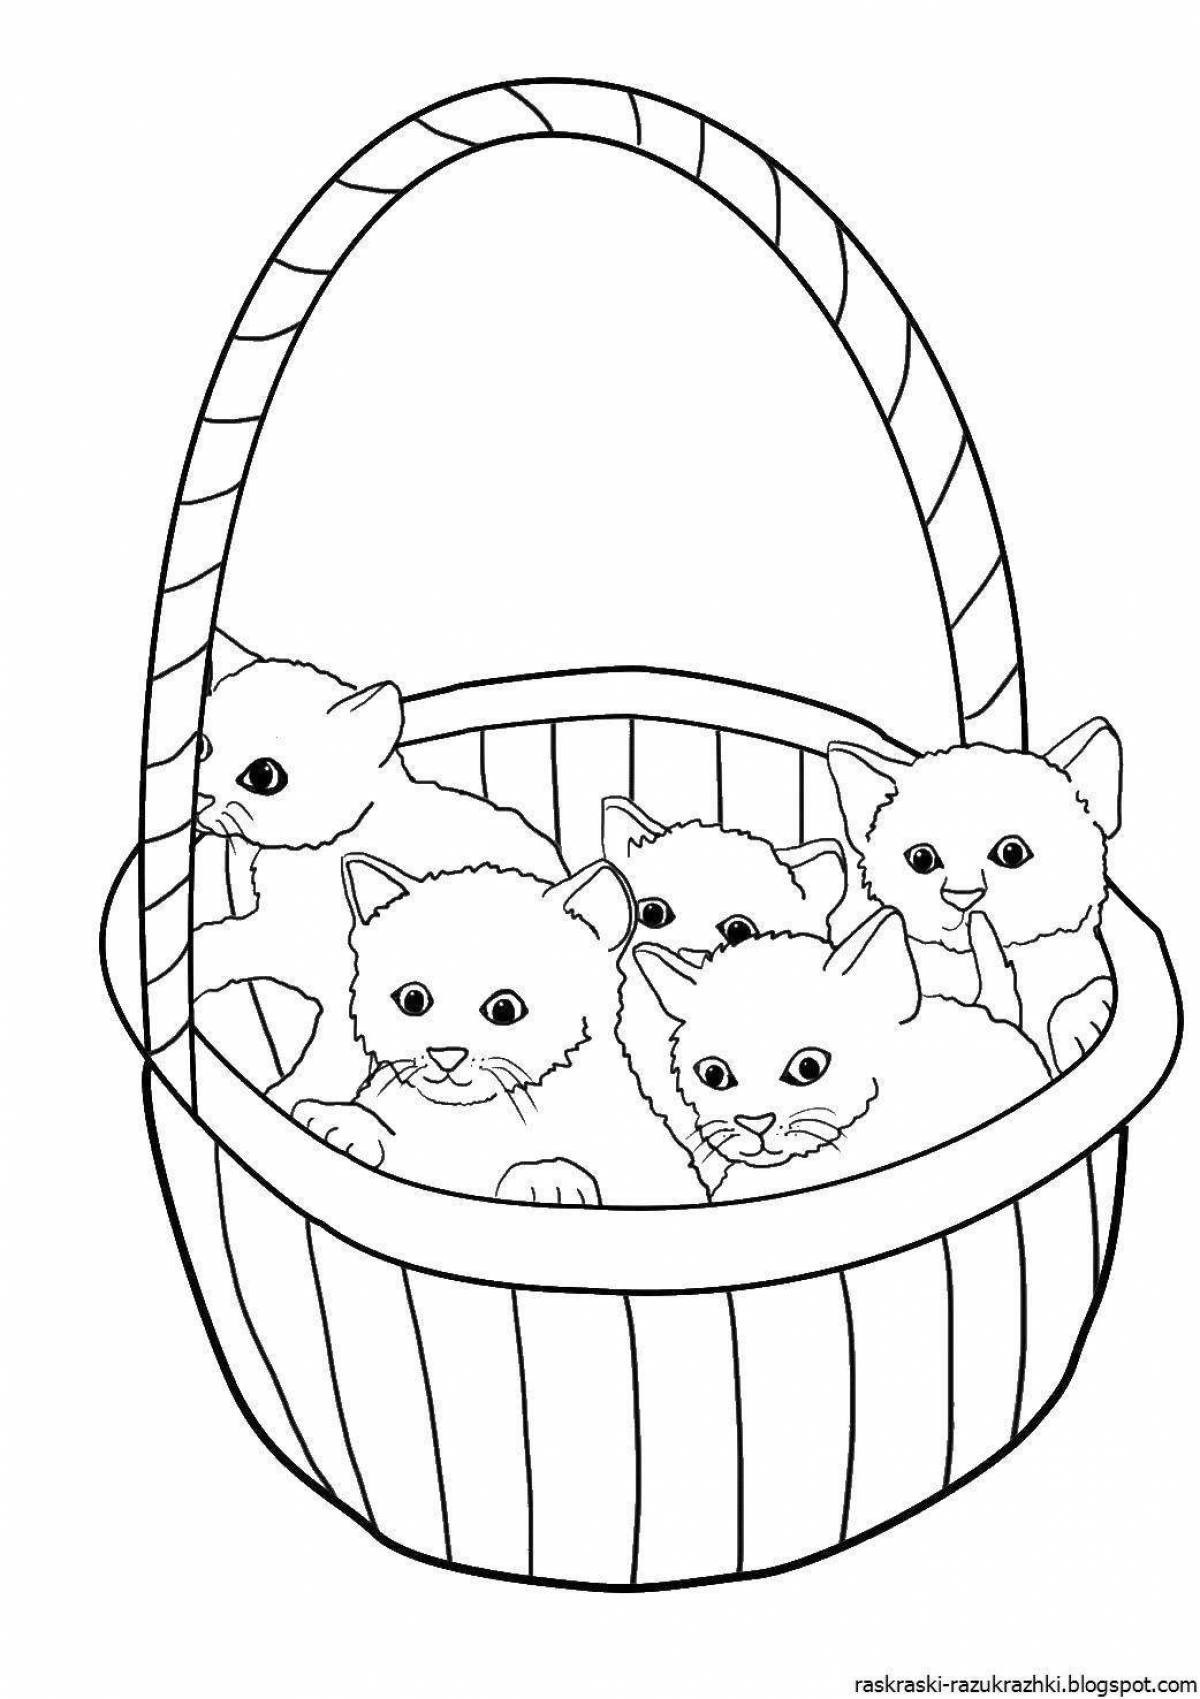 Snuggly little cat coloring page